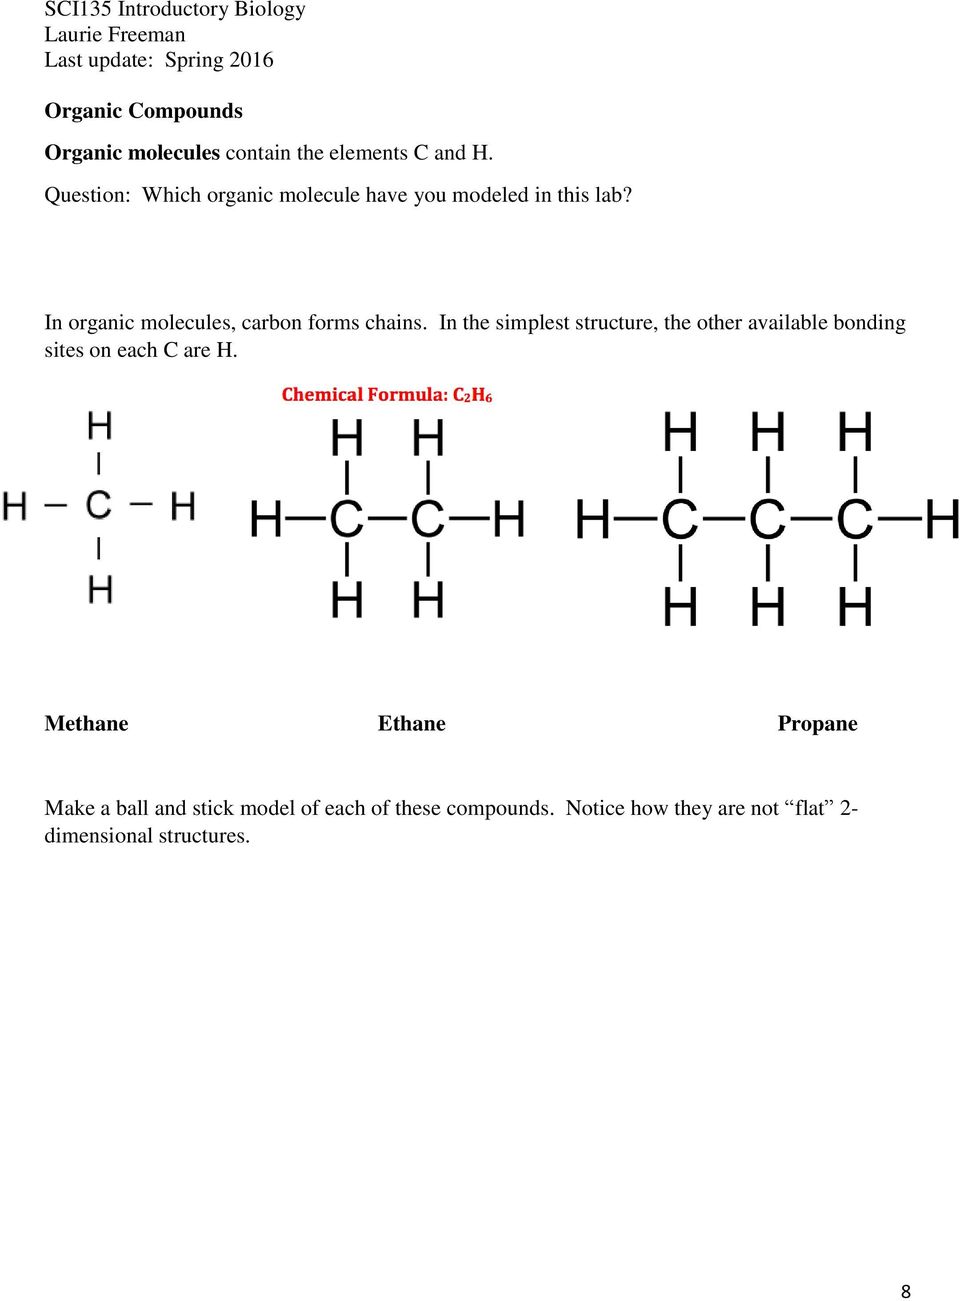 In organic molecules, carbon forms chains.